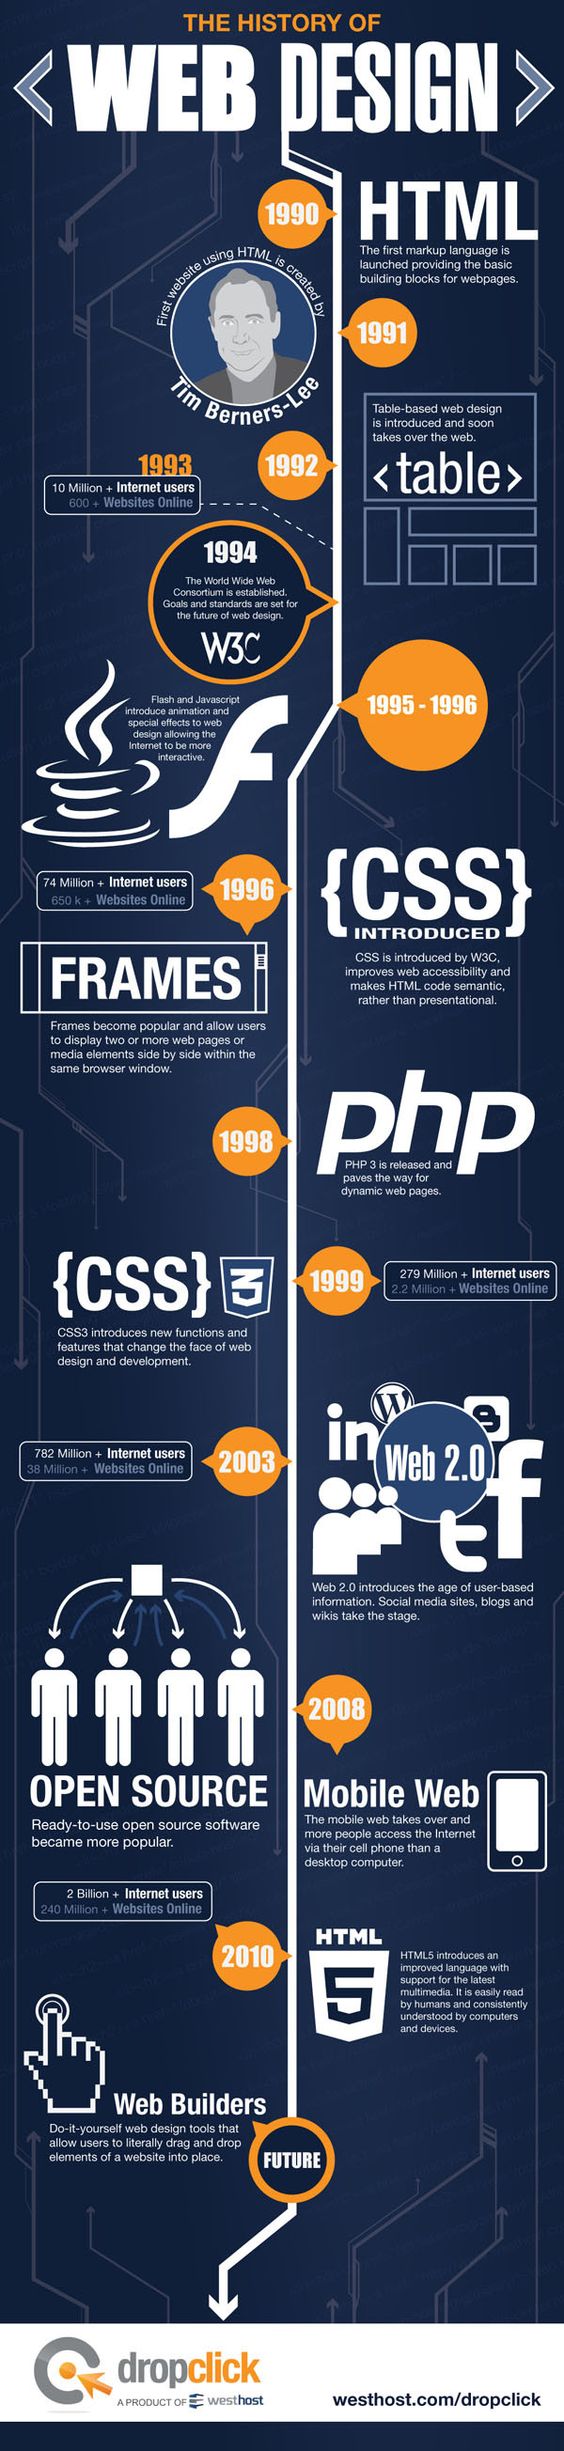 The History Of Web Design